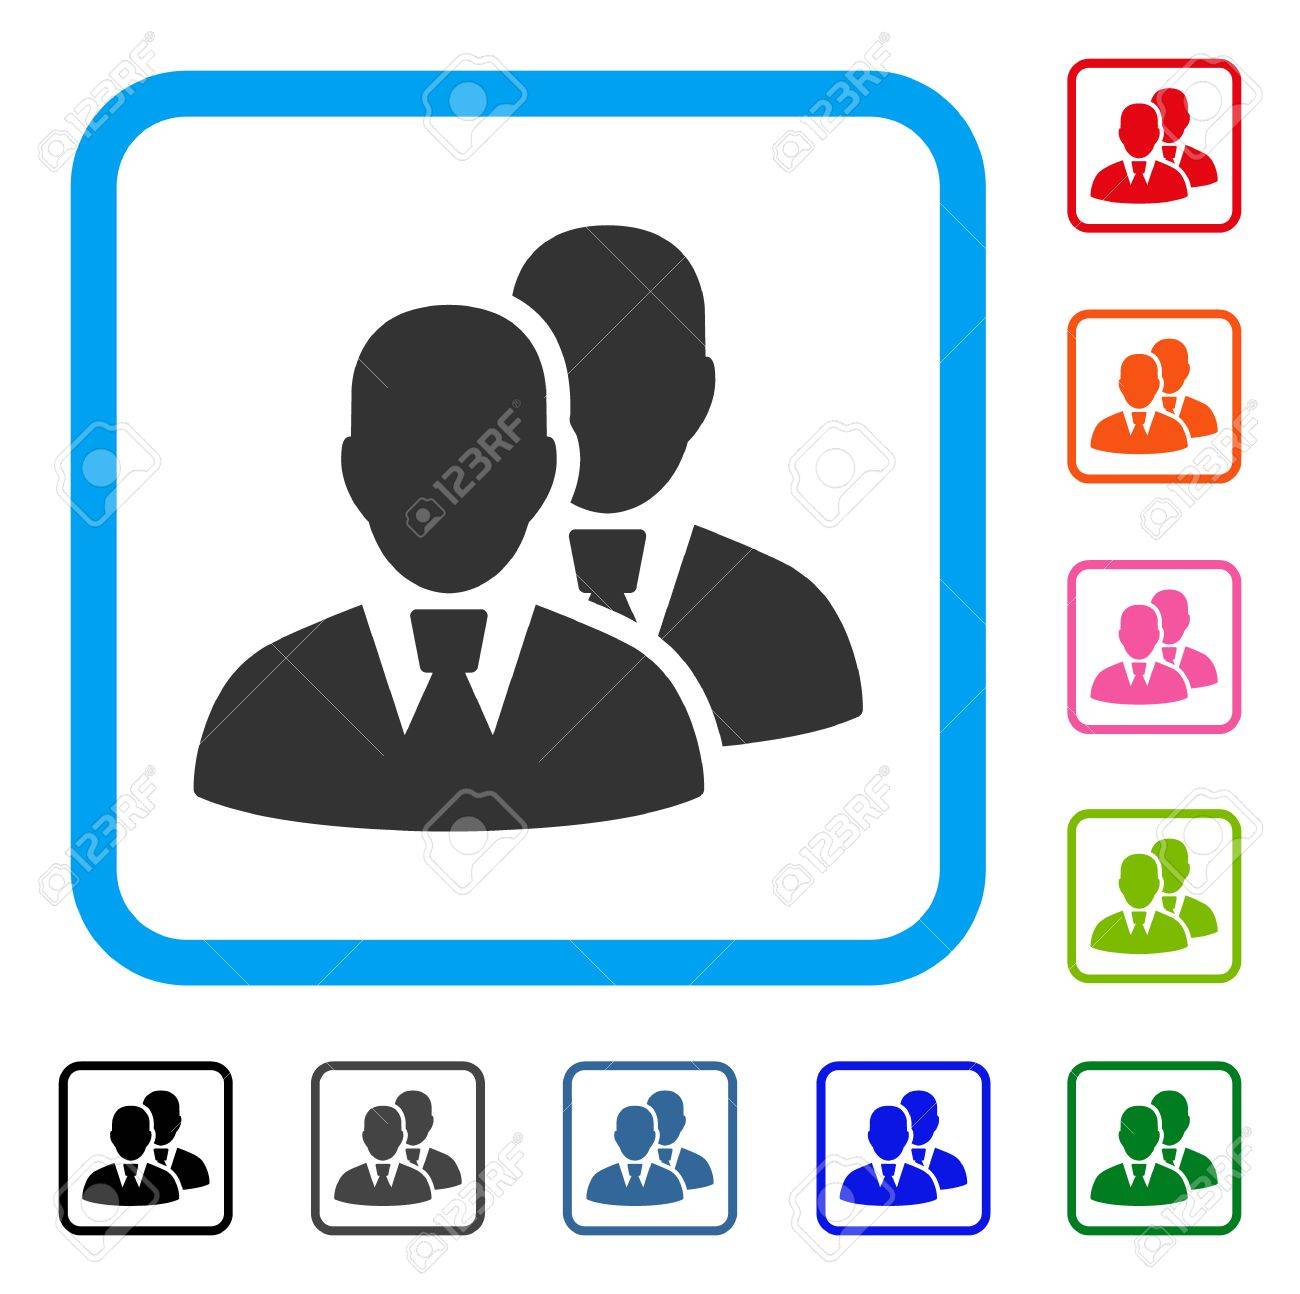 Managers icon with dating bonus Royalty Free Vector Image